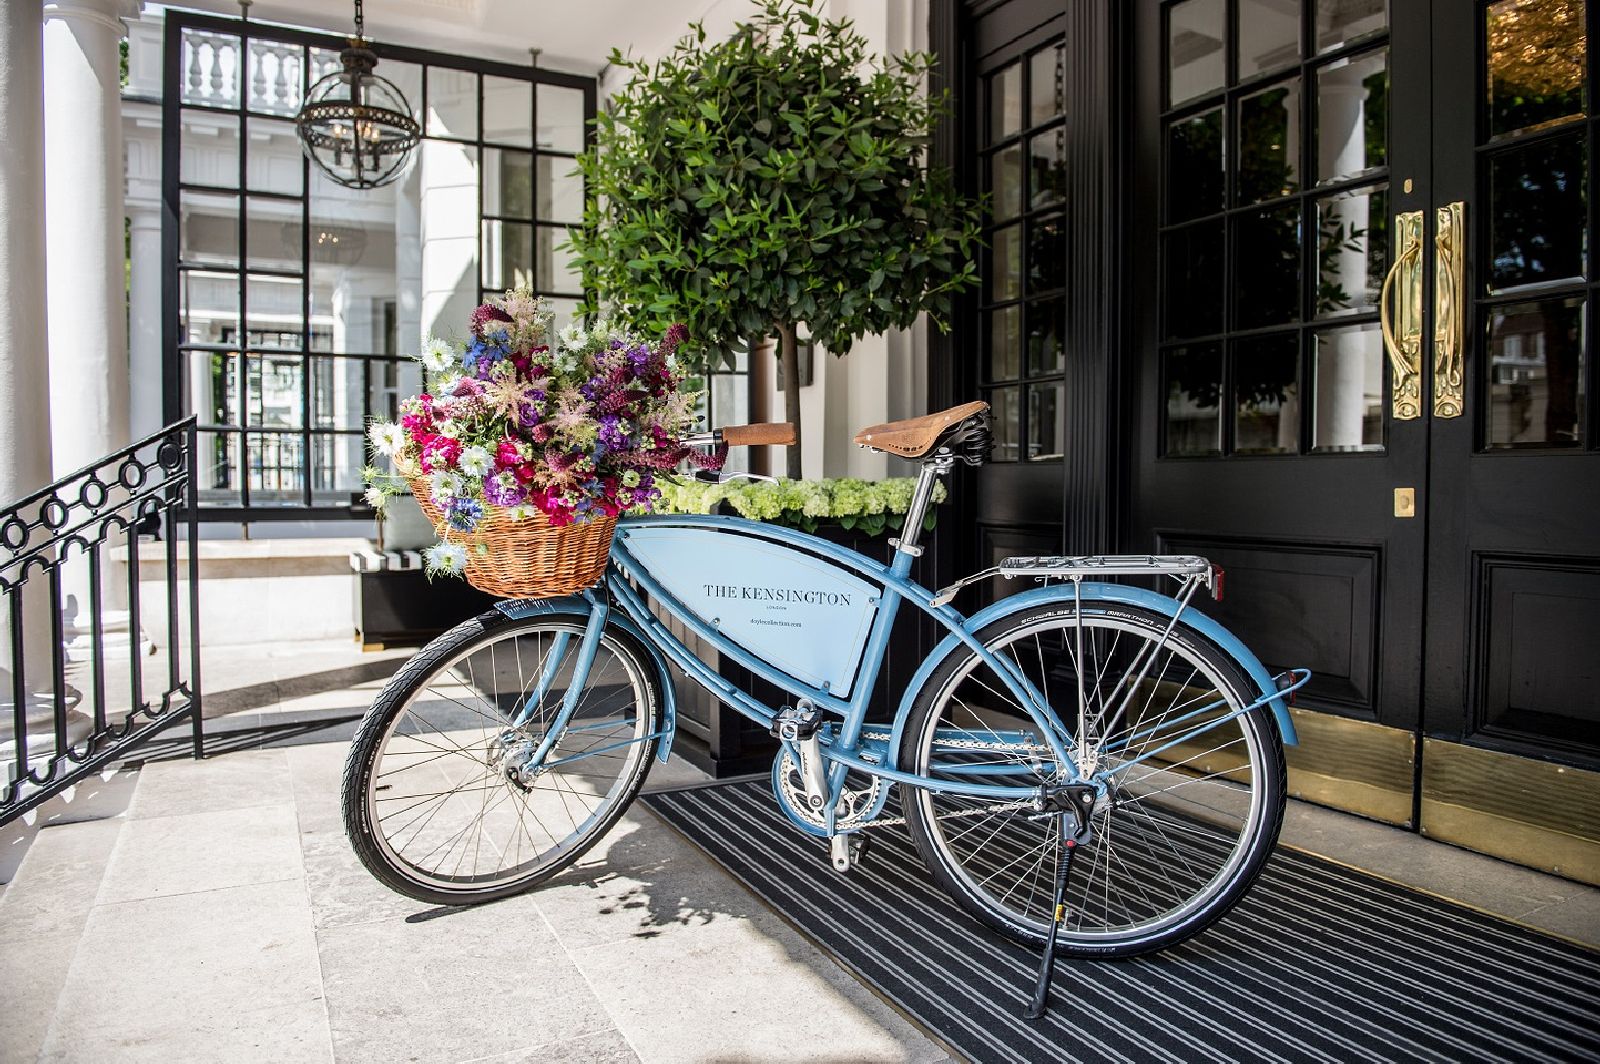 Pashley bicycle for guest use at The Kensington hotel in London